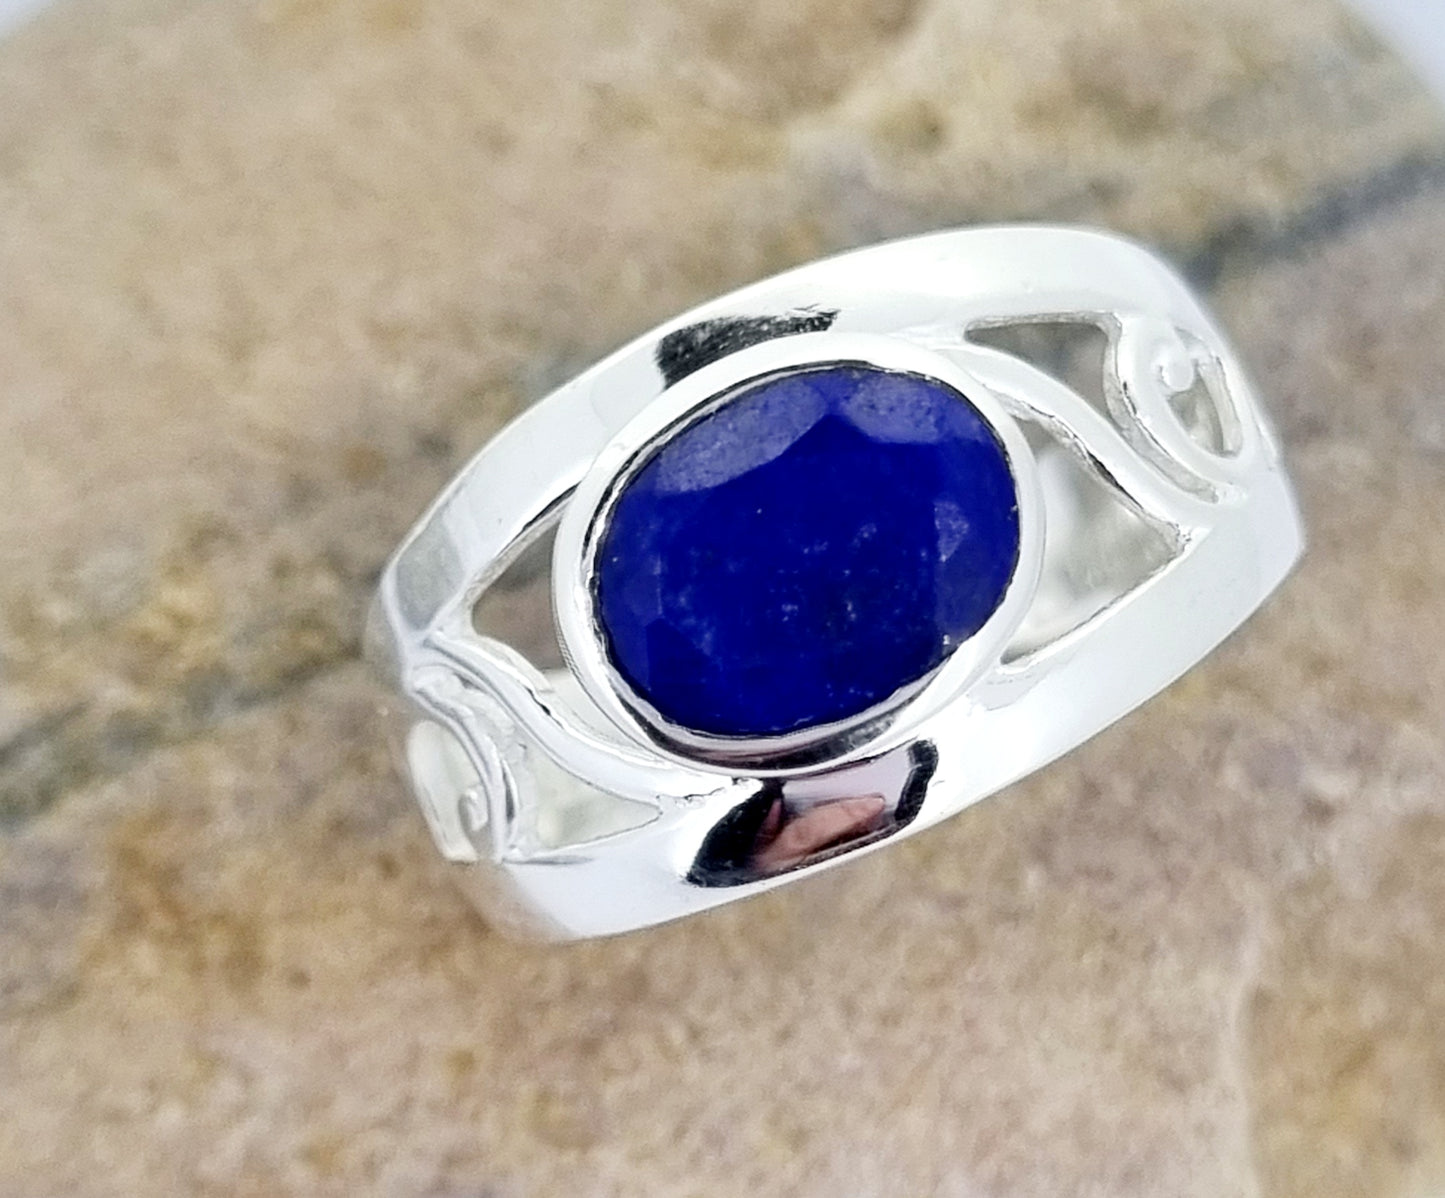 Lapis Lazuli Sterling Silver Ring Speckled With The Suncatcher Gem Pyrite.  Lapis Jewellery Was Worn By The  'Goddess of Love'.